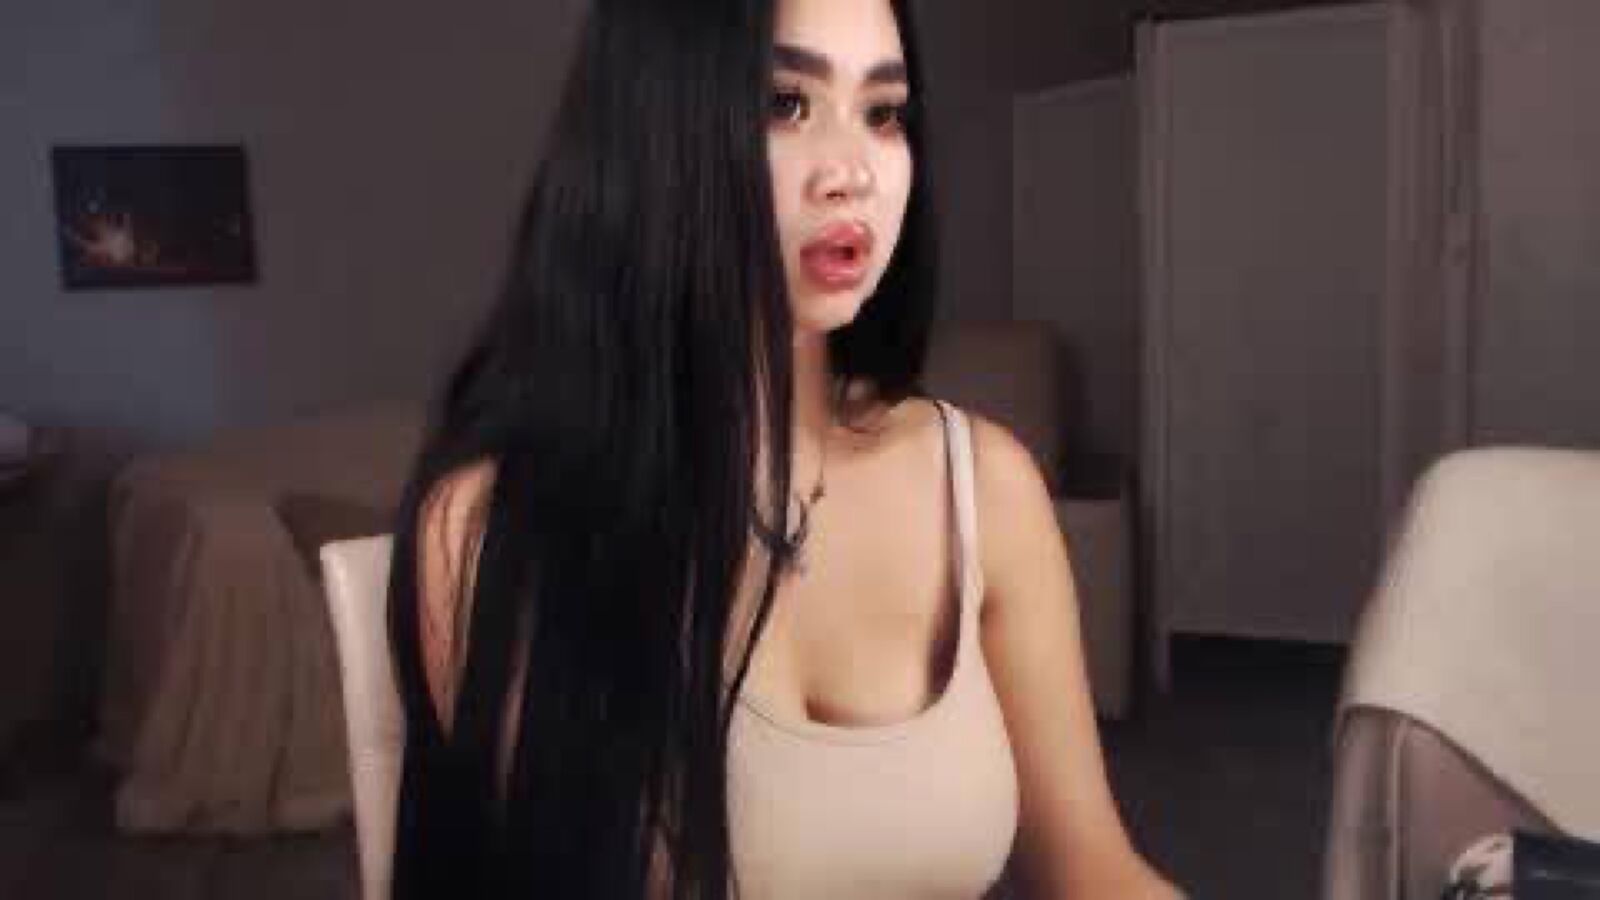 NamiPaltrow's live cam